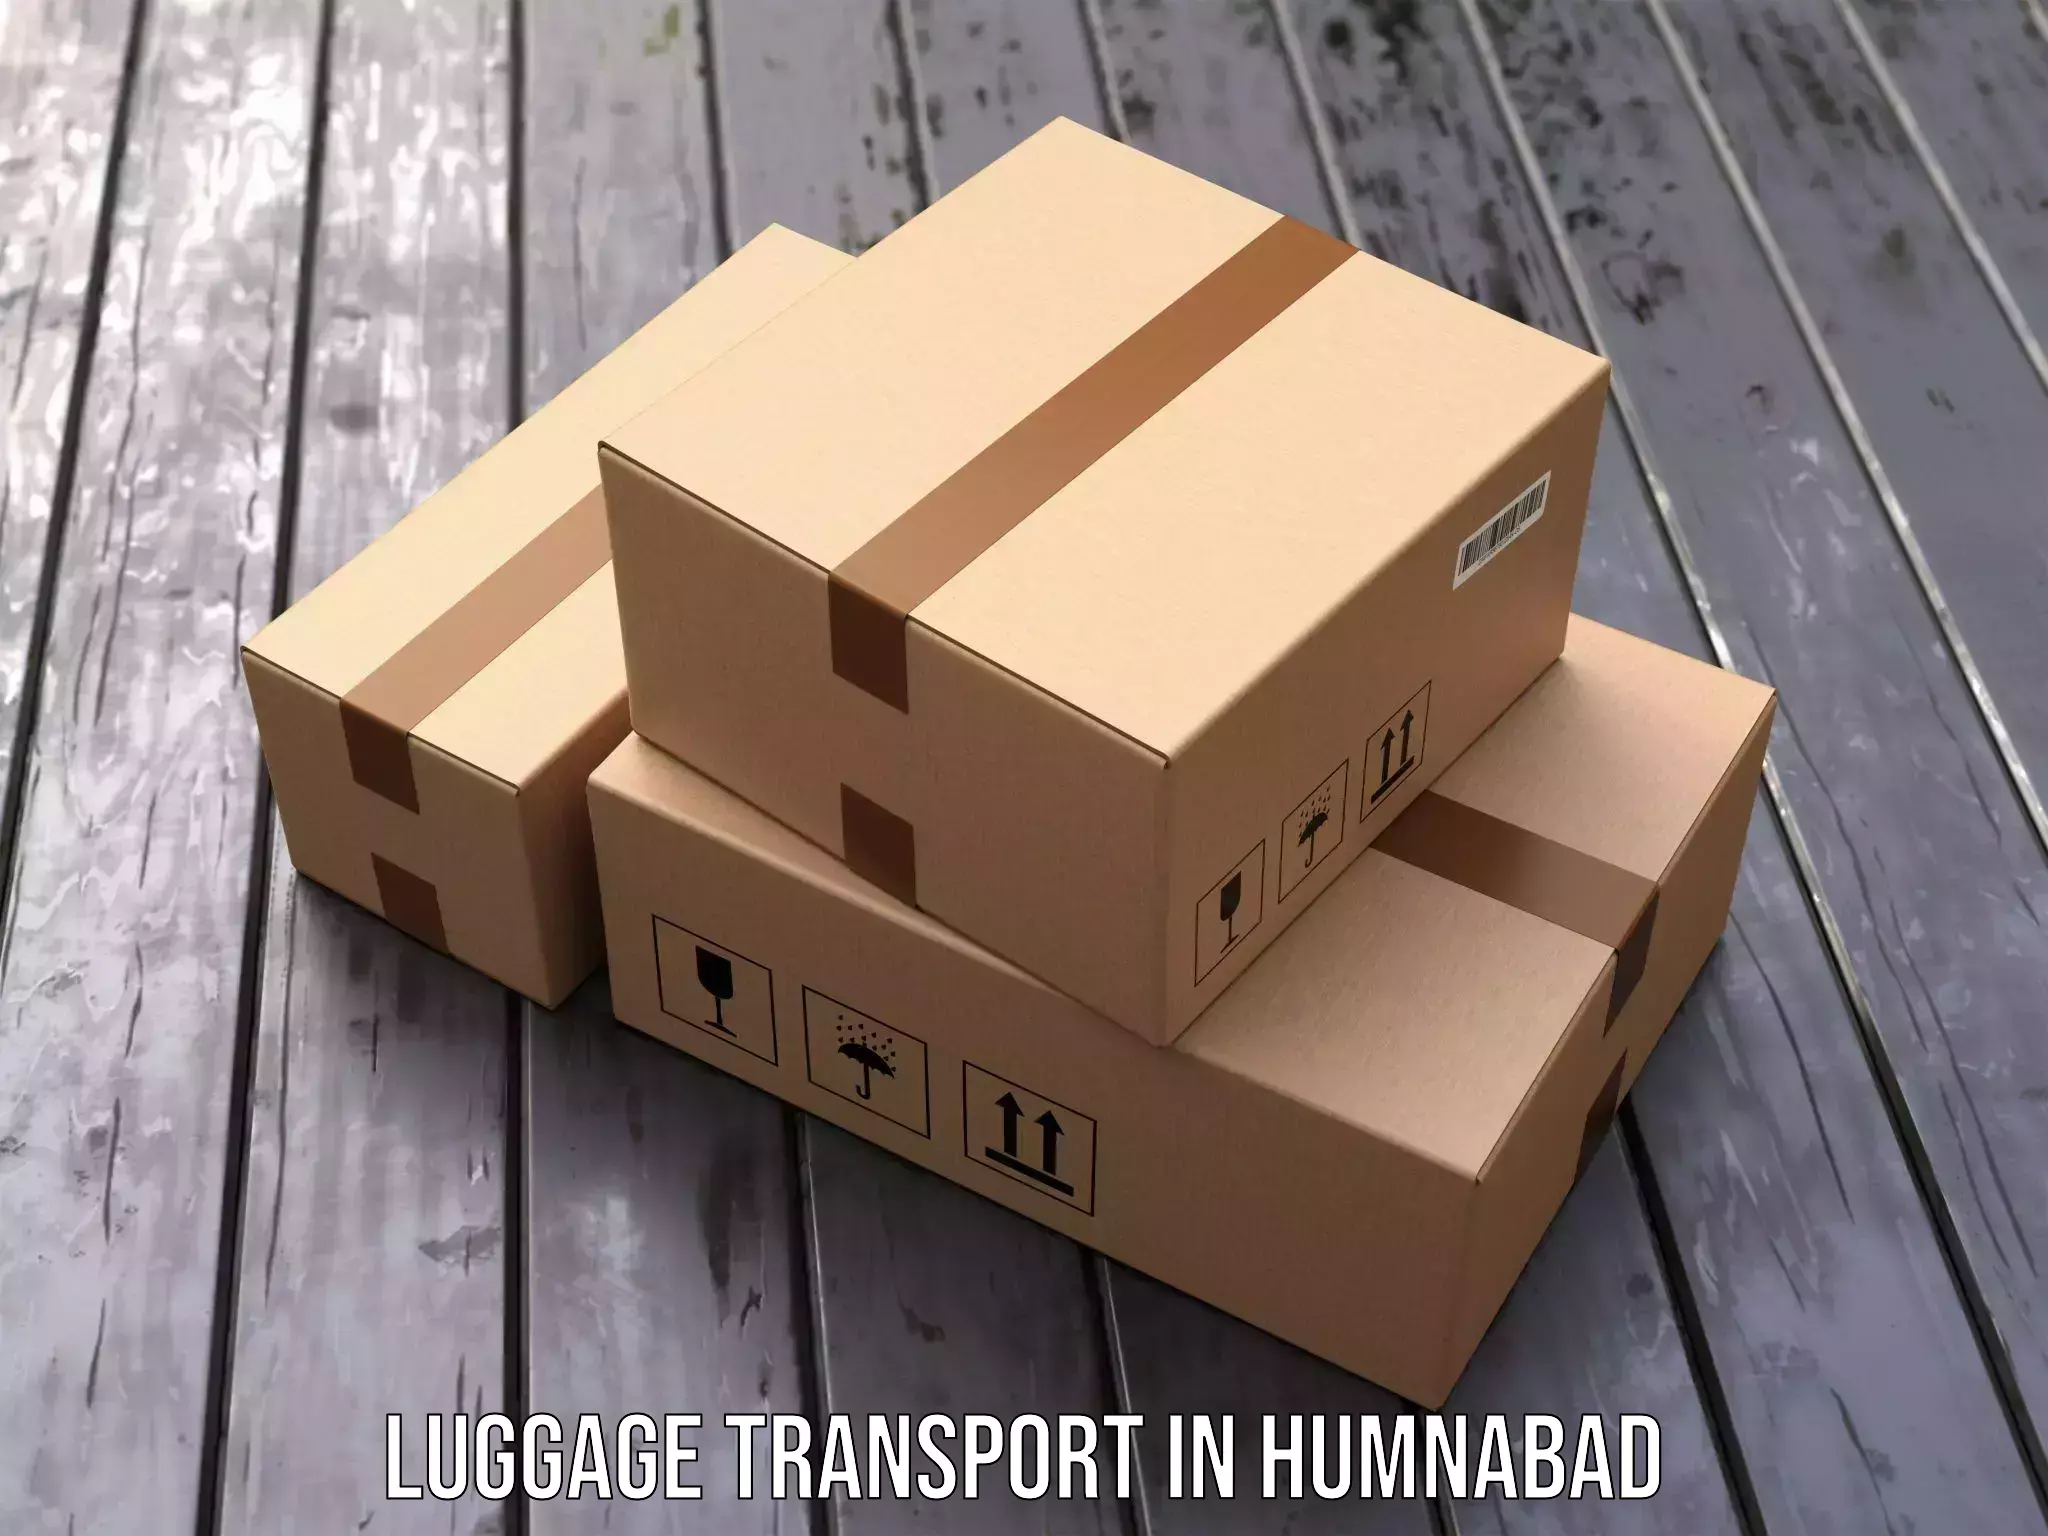 Luggage delivery system in Humnabad